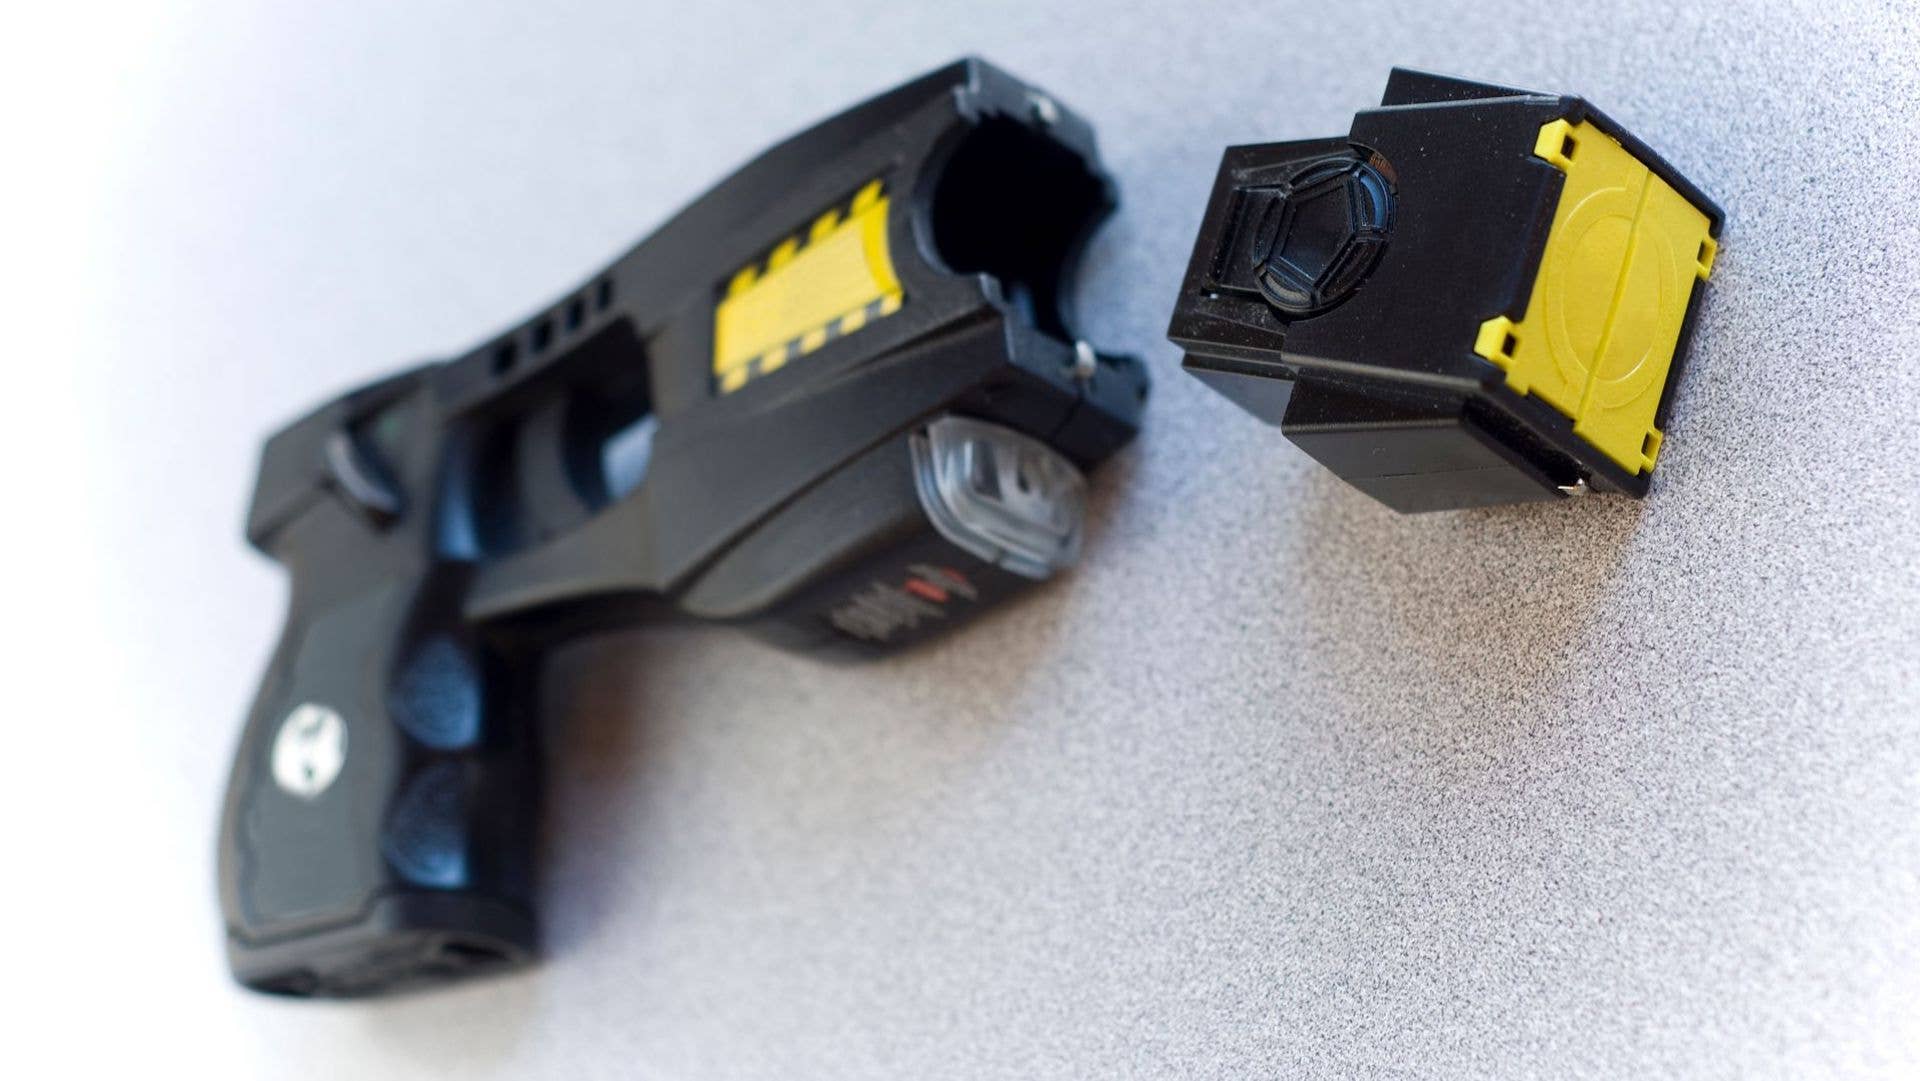 Stock photo of a police taser